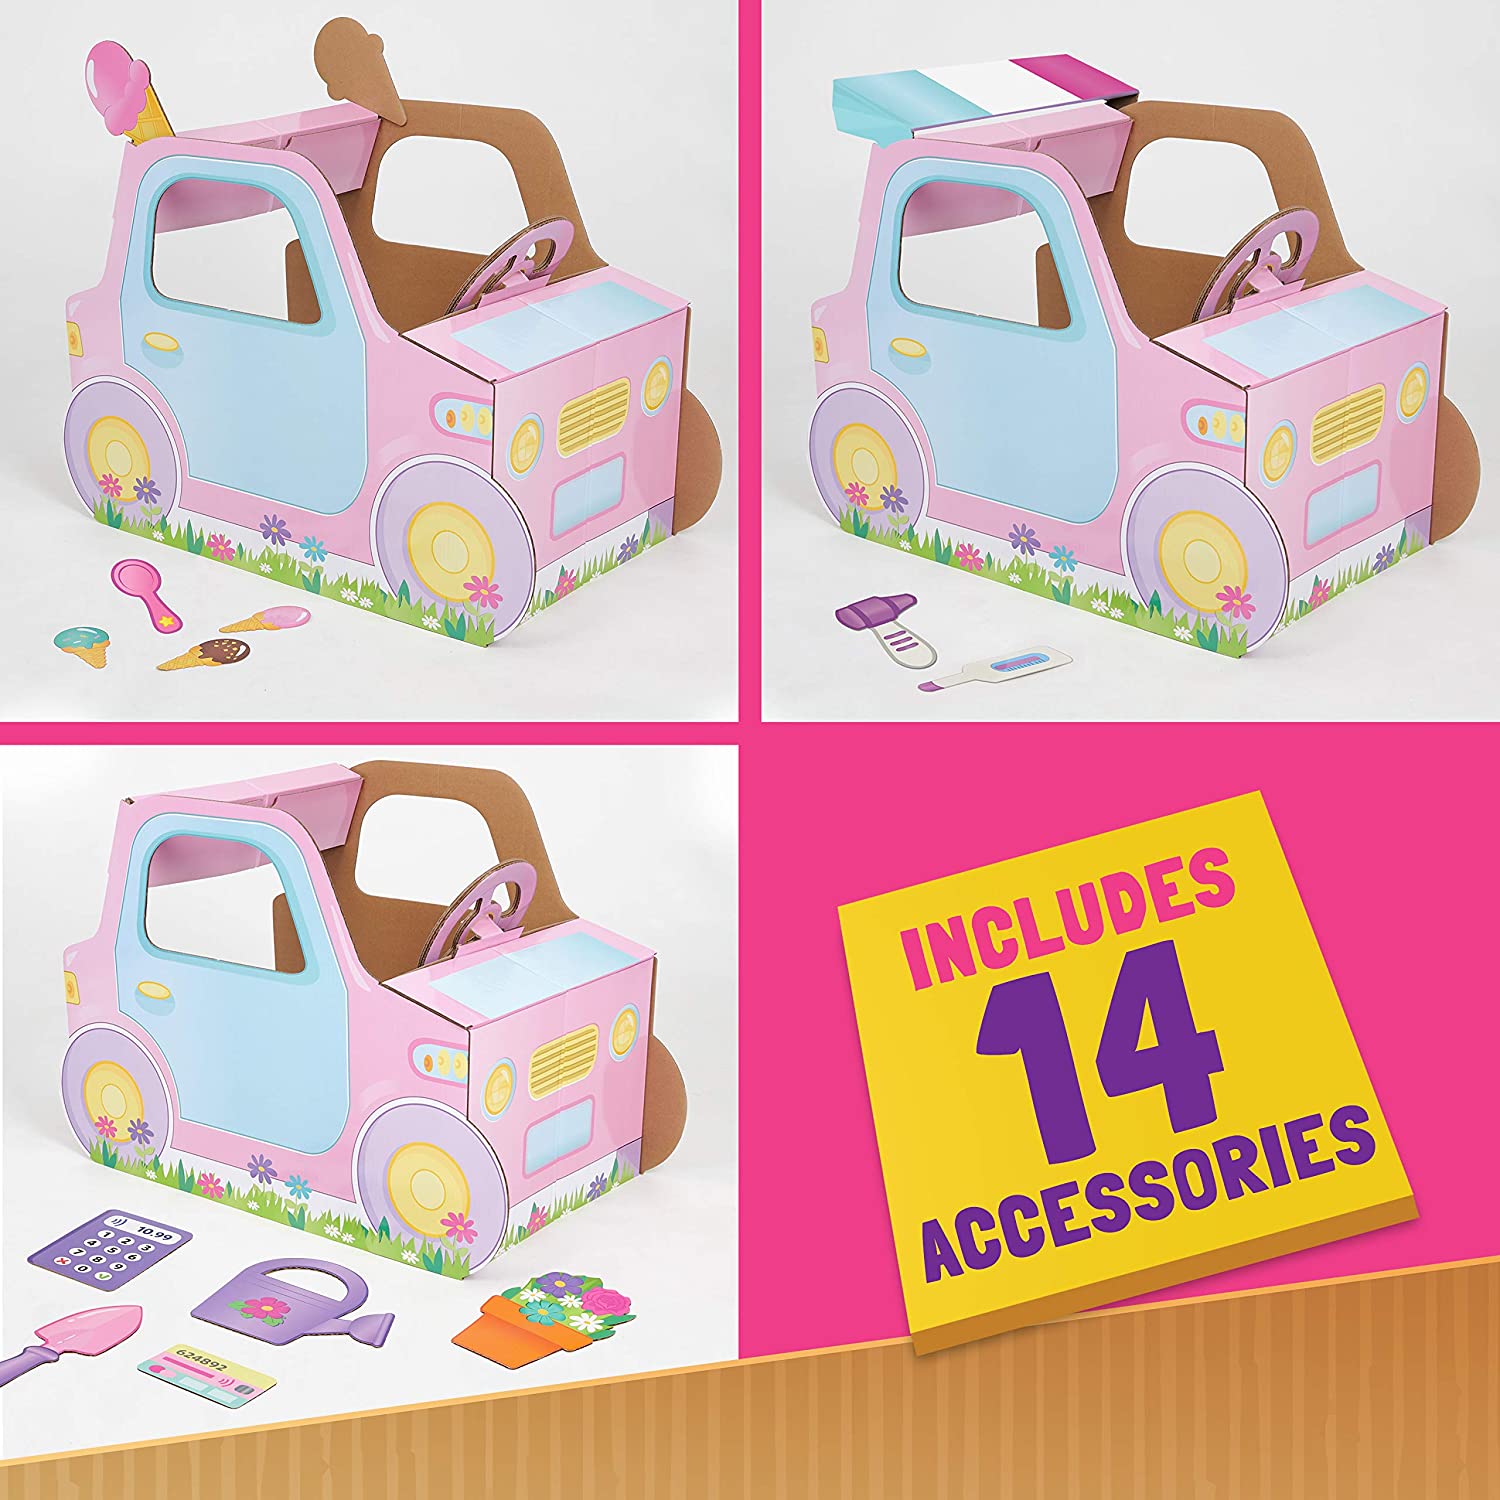 Wowee Pop2Play Toddlers' 3-In 1 Ice Cream Truck, Flower Truck & Ambulance Playset w/ 14 Accessories (Pink) $9.70 + FS w/ Prime or FS on $25+